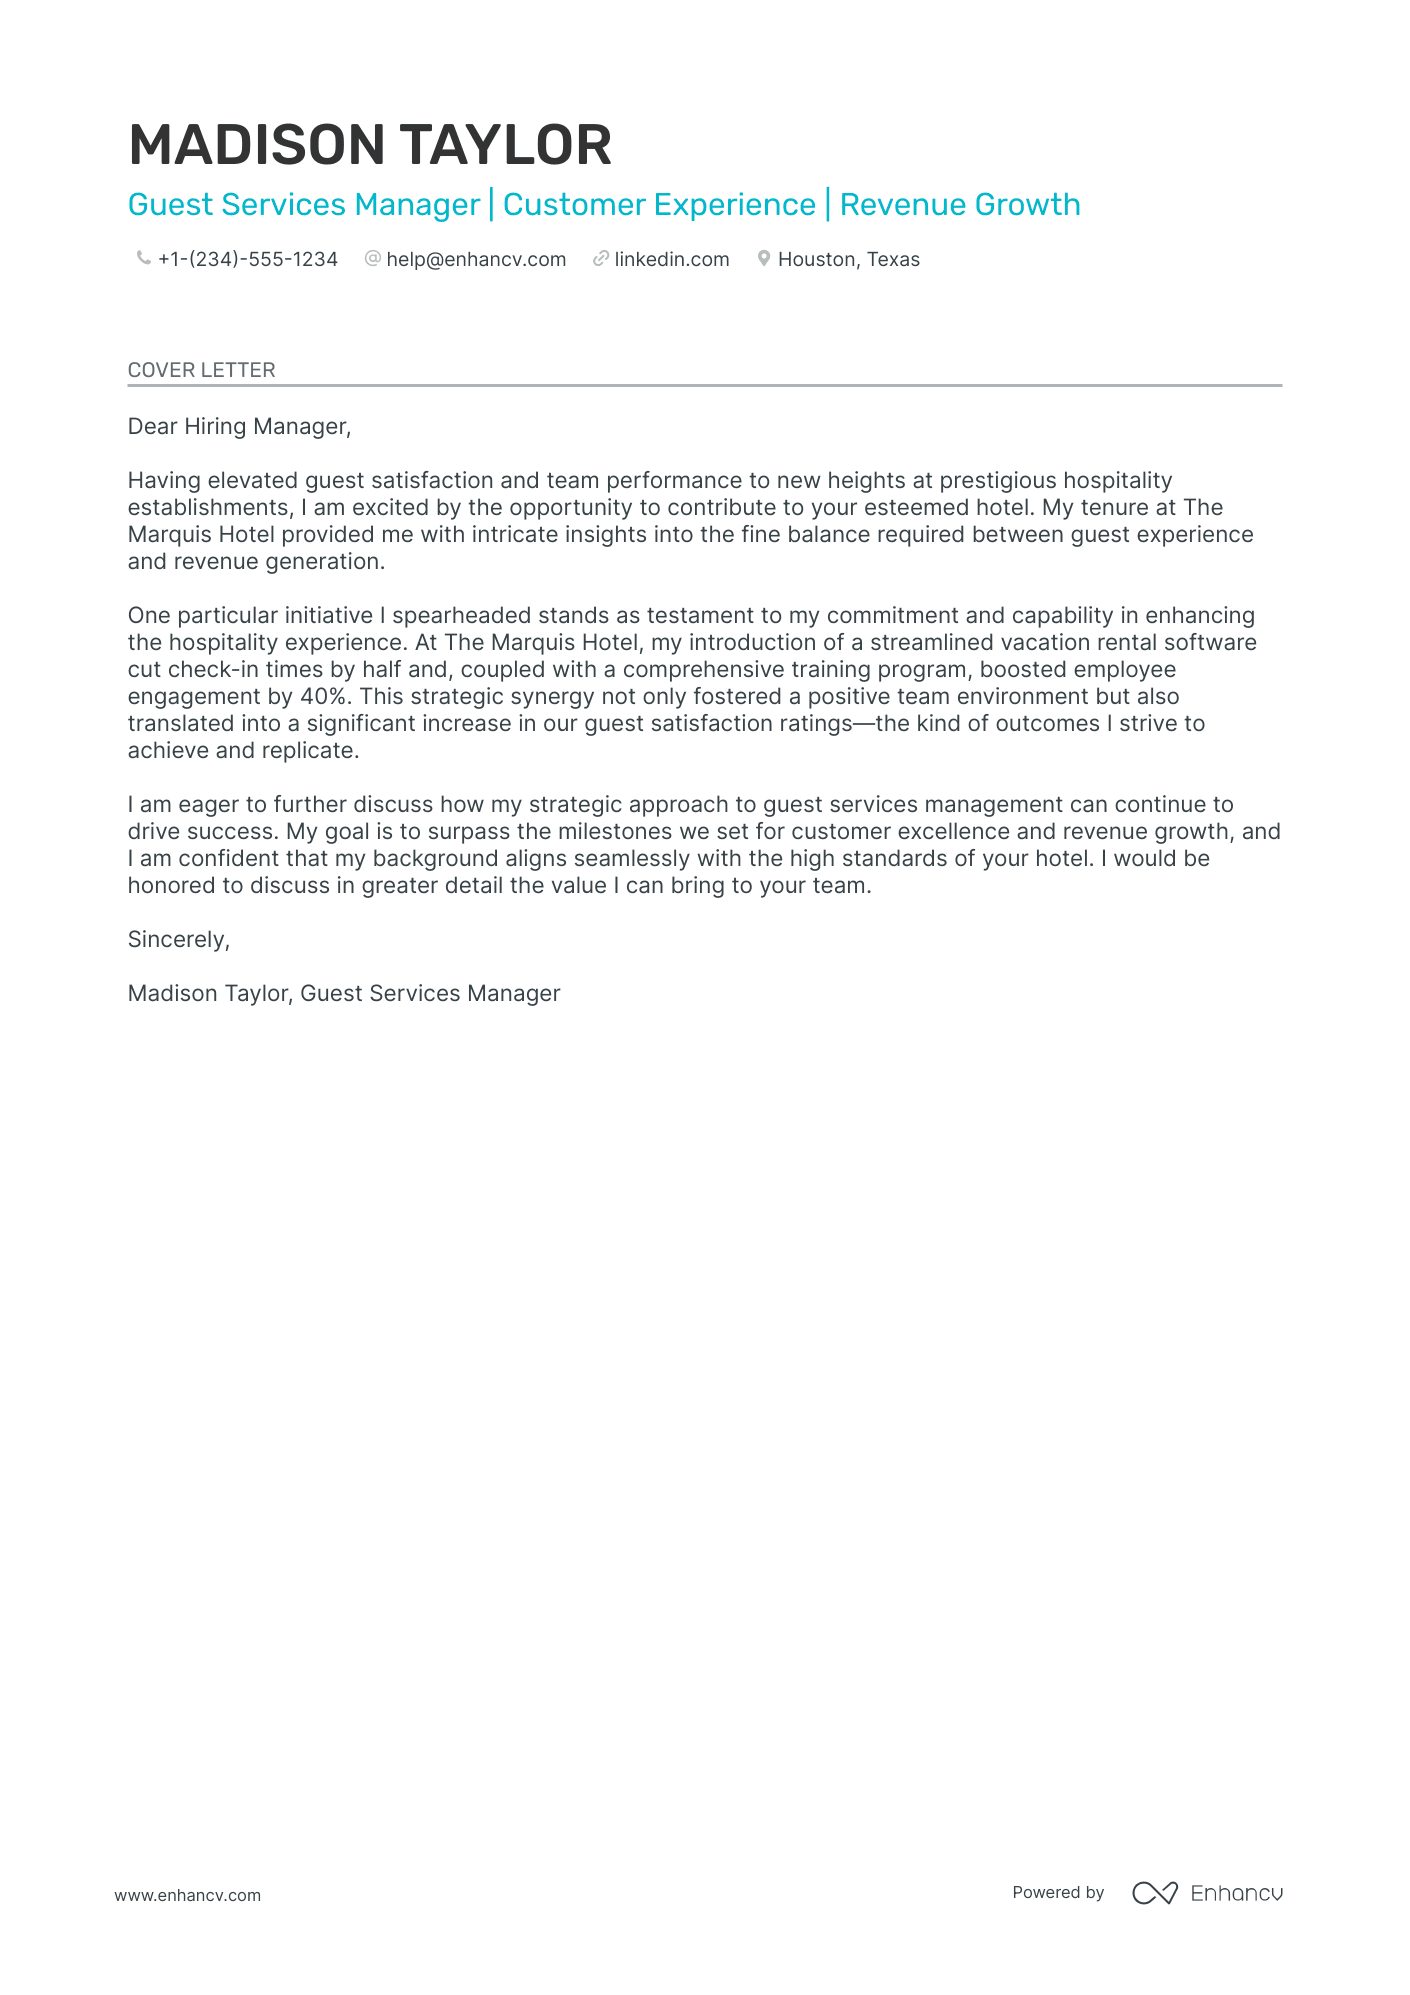 cover letter of hotel manager